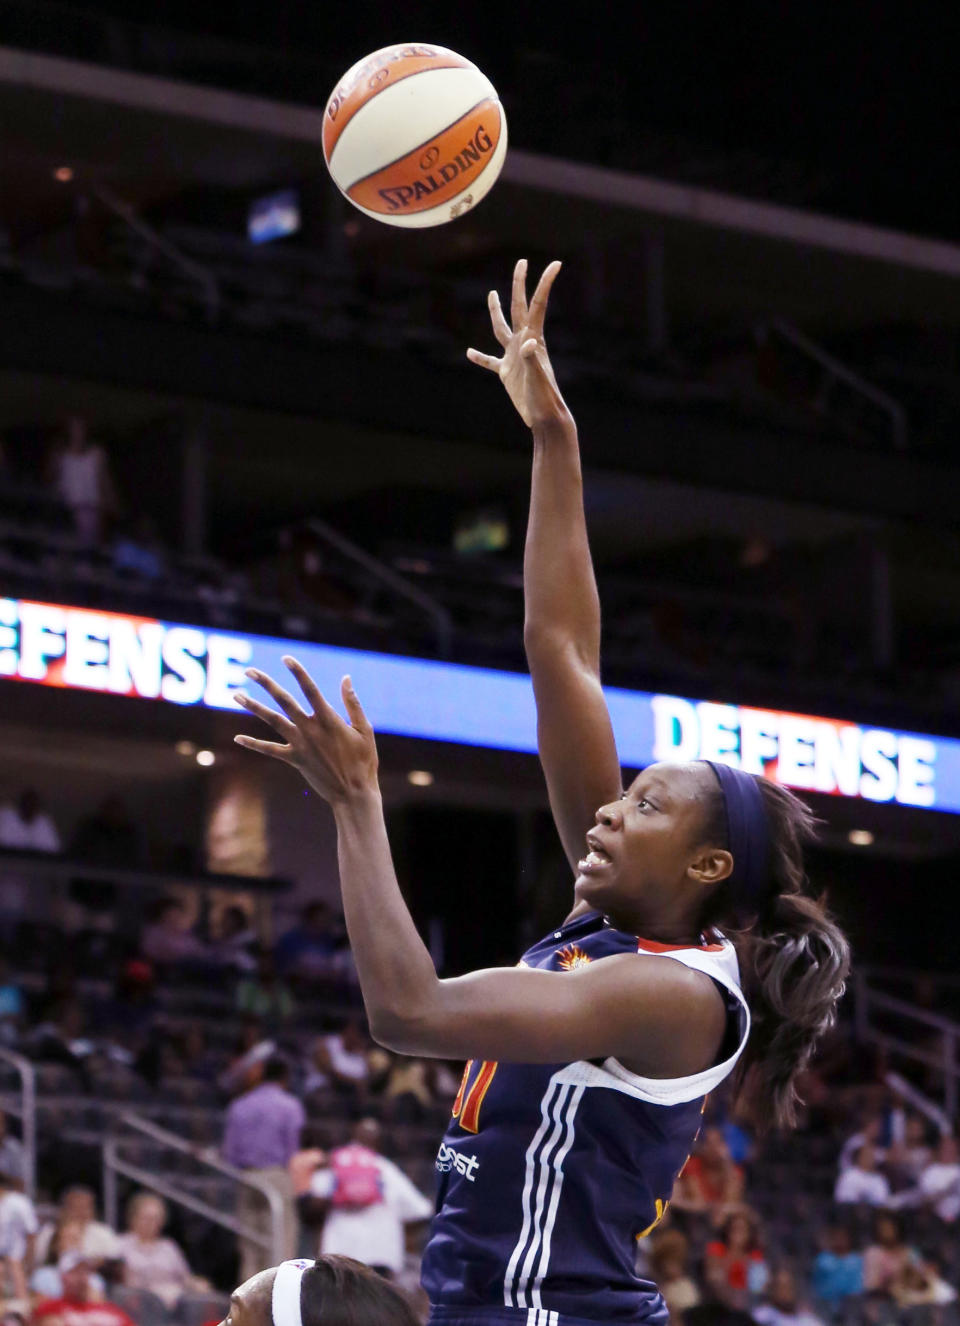 FILE - In an Aug. 16, 2012, file photo Connecticut Sun center Tina Charles goes up for a basket against the New York Liberty during the second half of a WNBA basketball game at the Prudential Center in Newark, N.J. People familiar with the situation say the Connecticut Sun have agreed to trade Tina Charles to New York for players to be named later and the Liberty's first round pick in 2015. (AP Photo/John Minchillo, File)